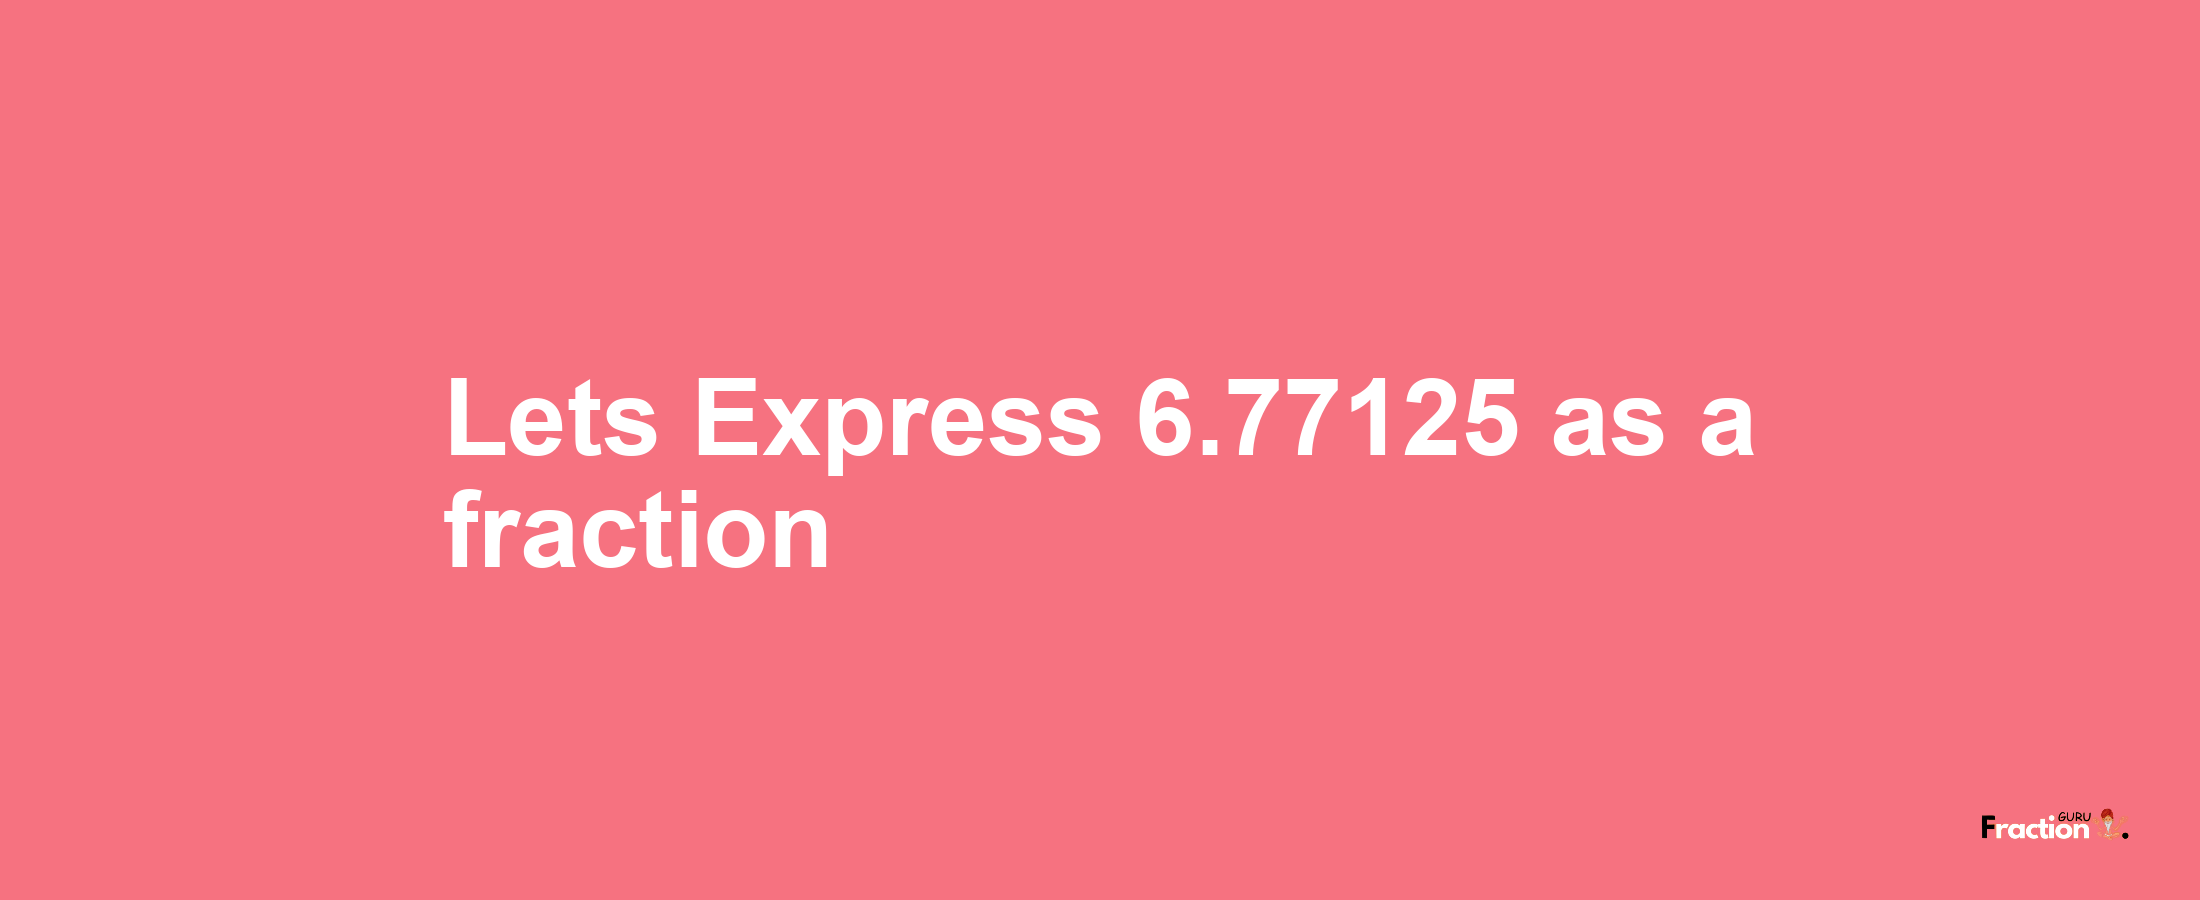 Lets Express 6.77125 as afraction